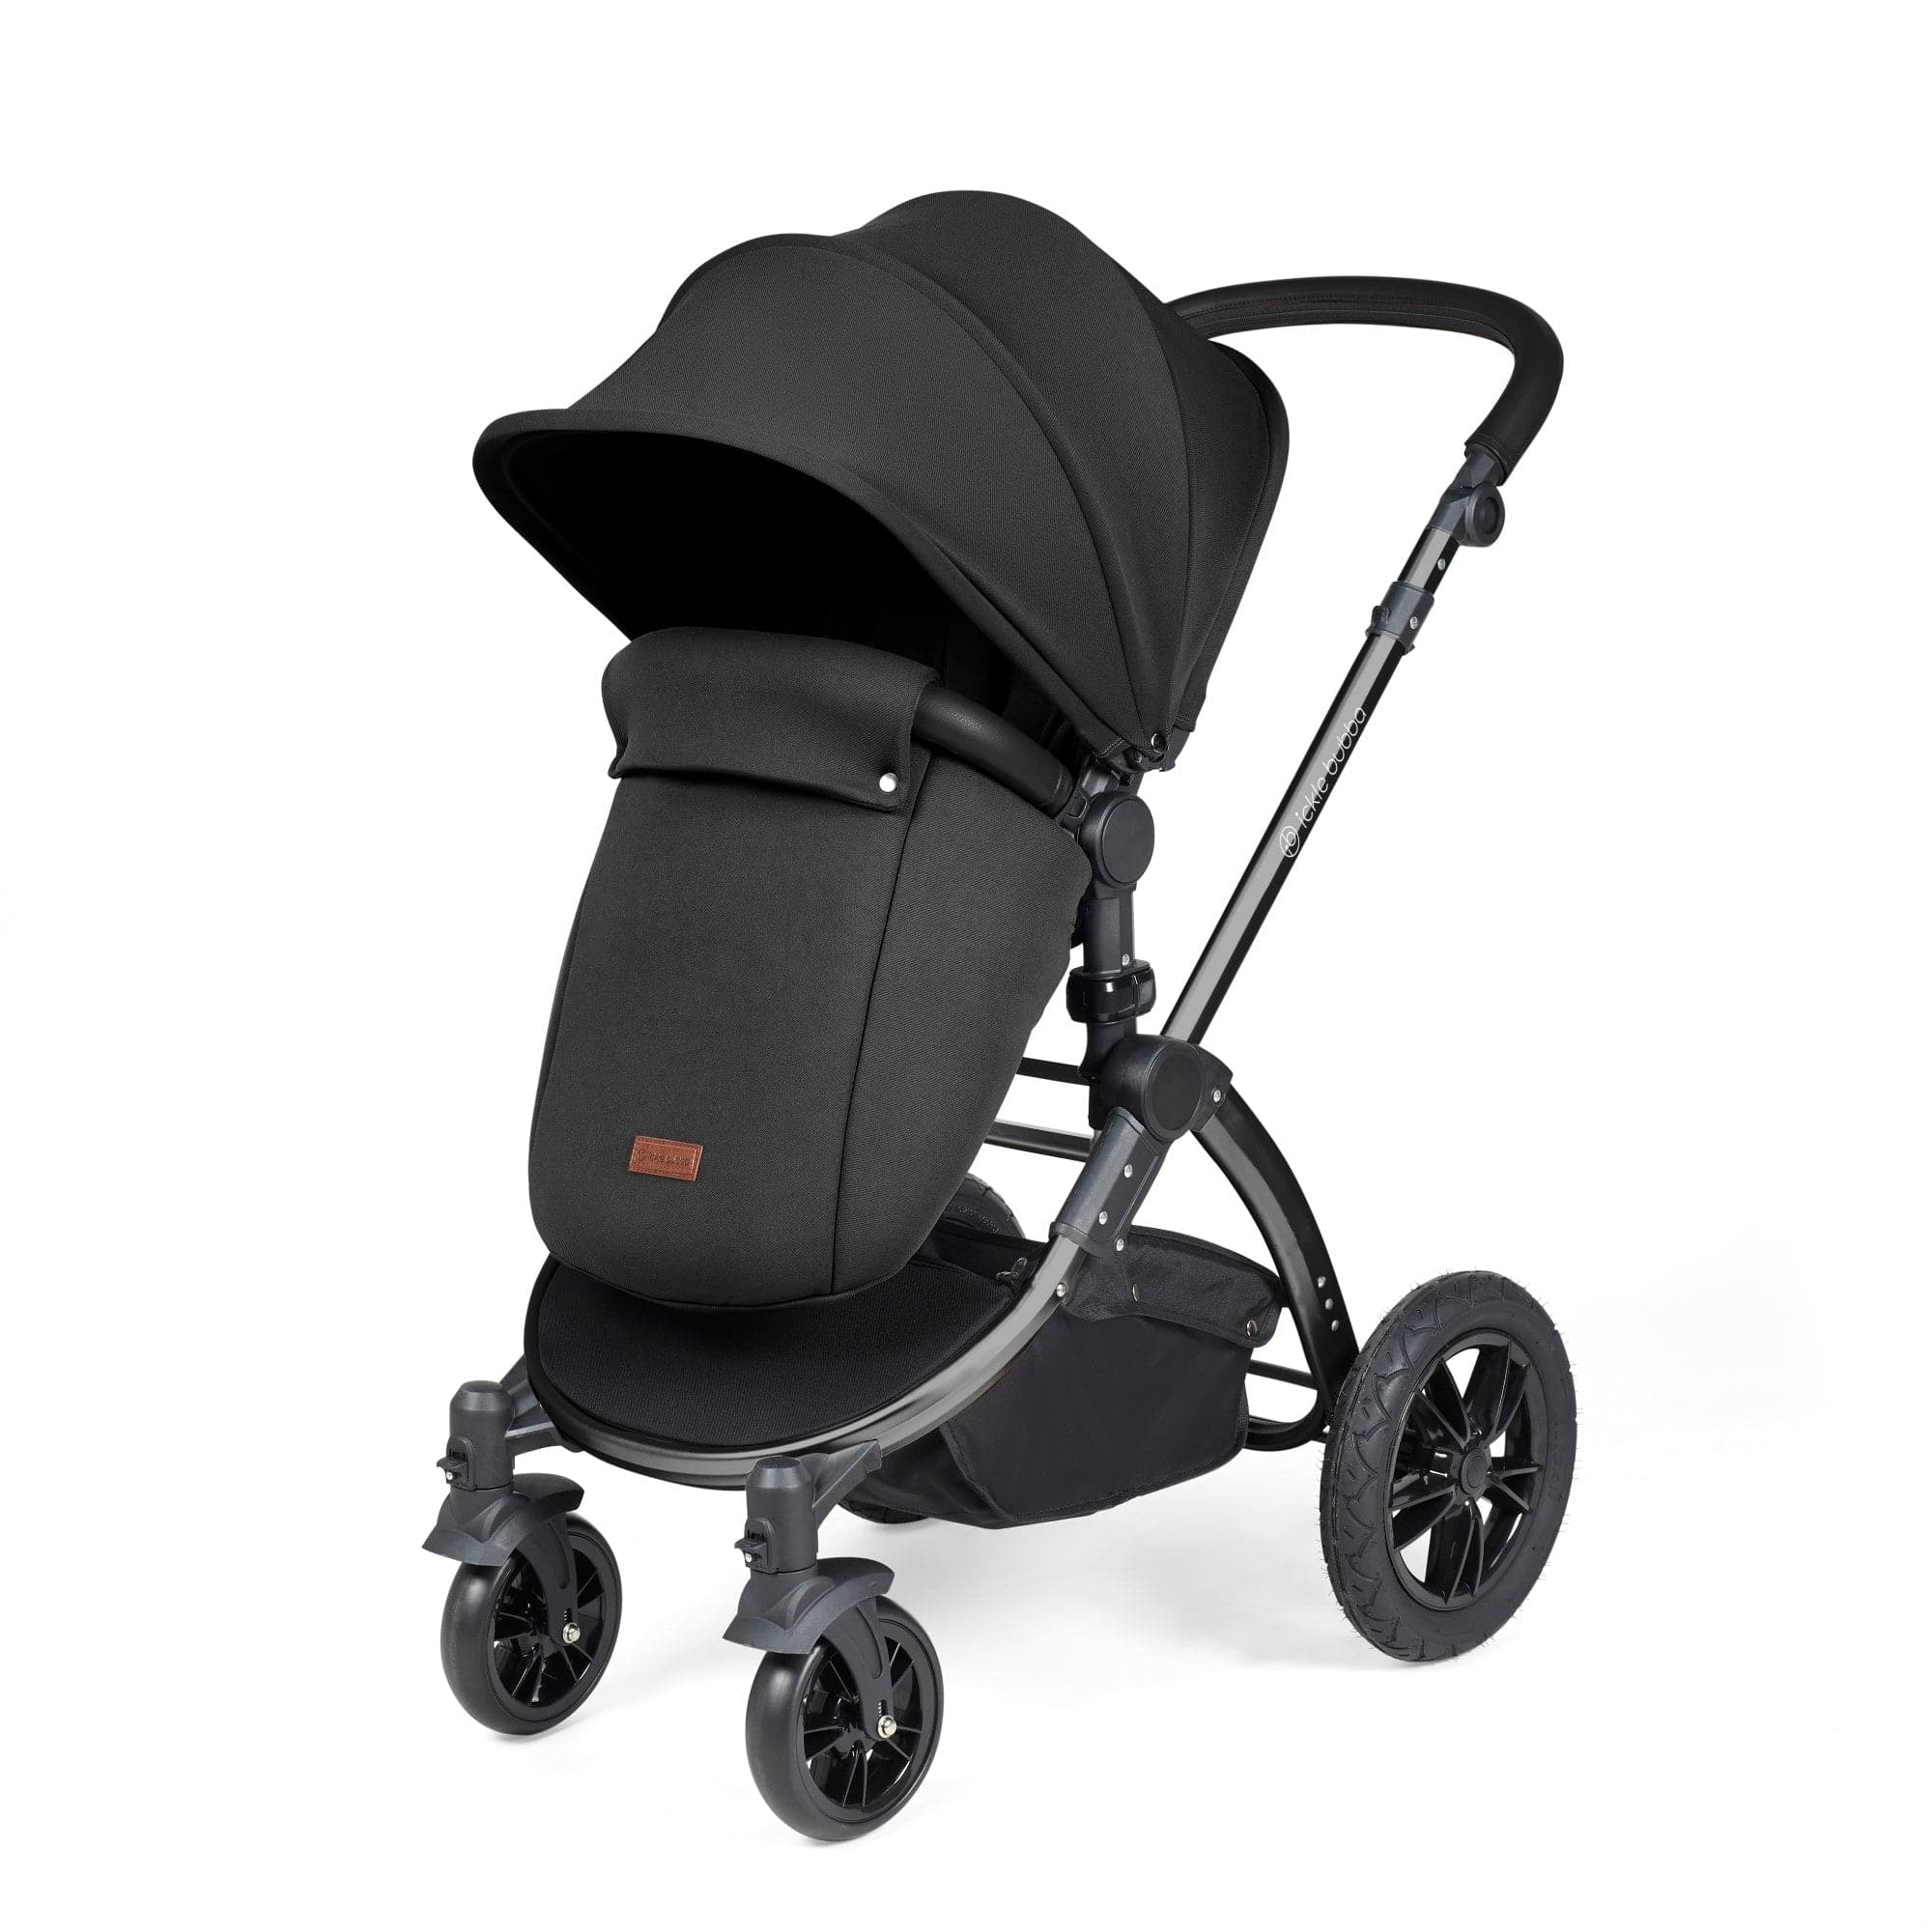 Ickle Bubba Stomp Luxe All-In-One I-Size Travel System - Black / Midnight / Black - For Your Little One